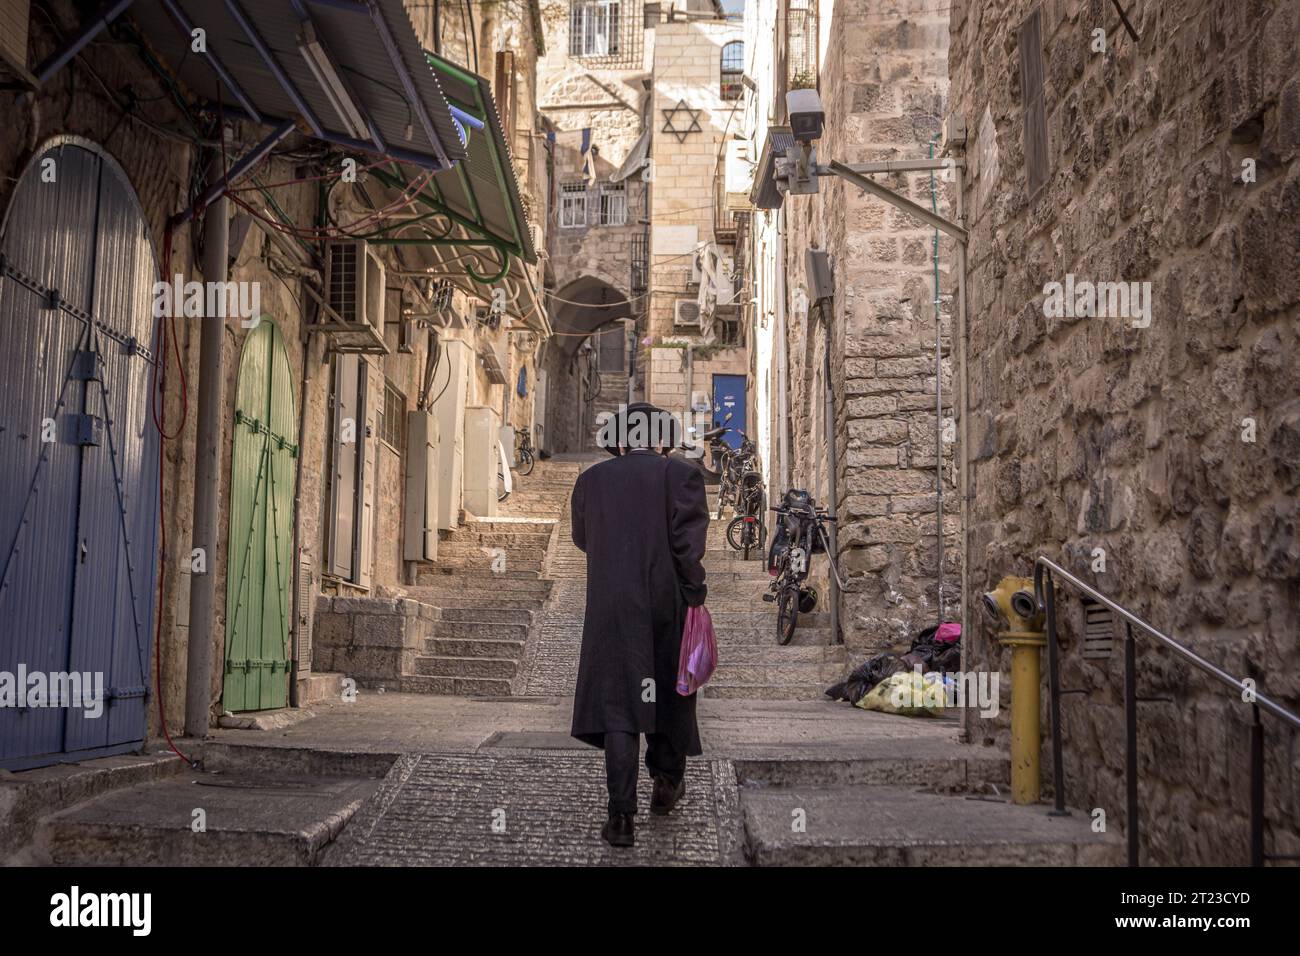 The haredi (ultra-Orthodox) Jewish man is walking down the empty street in the old  city of Jerusalem in Israel. Stock Photo